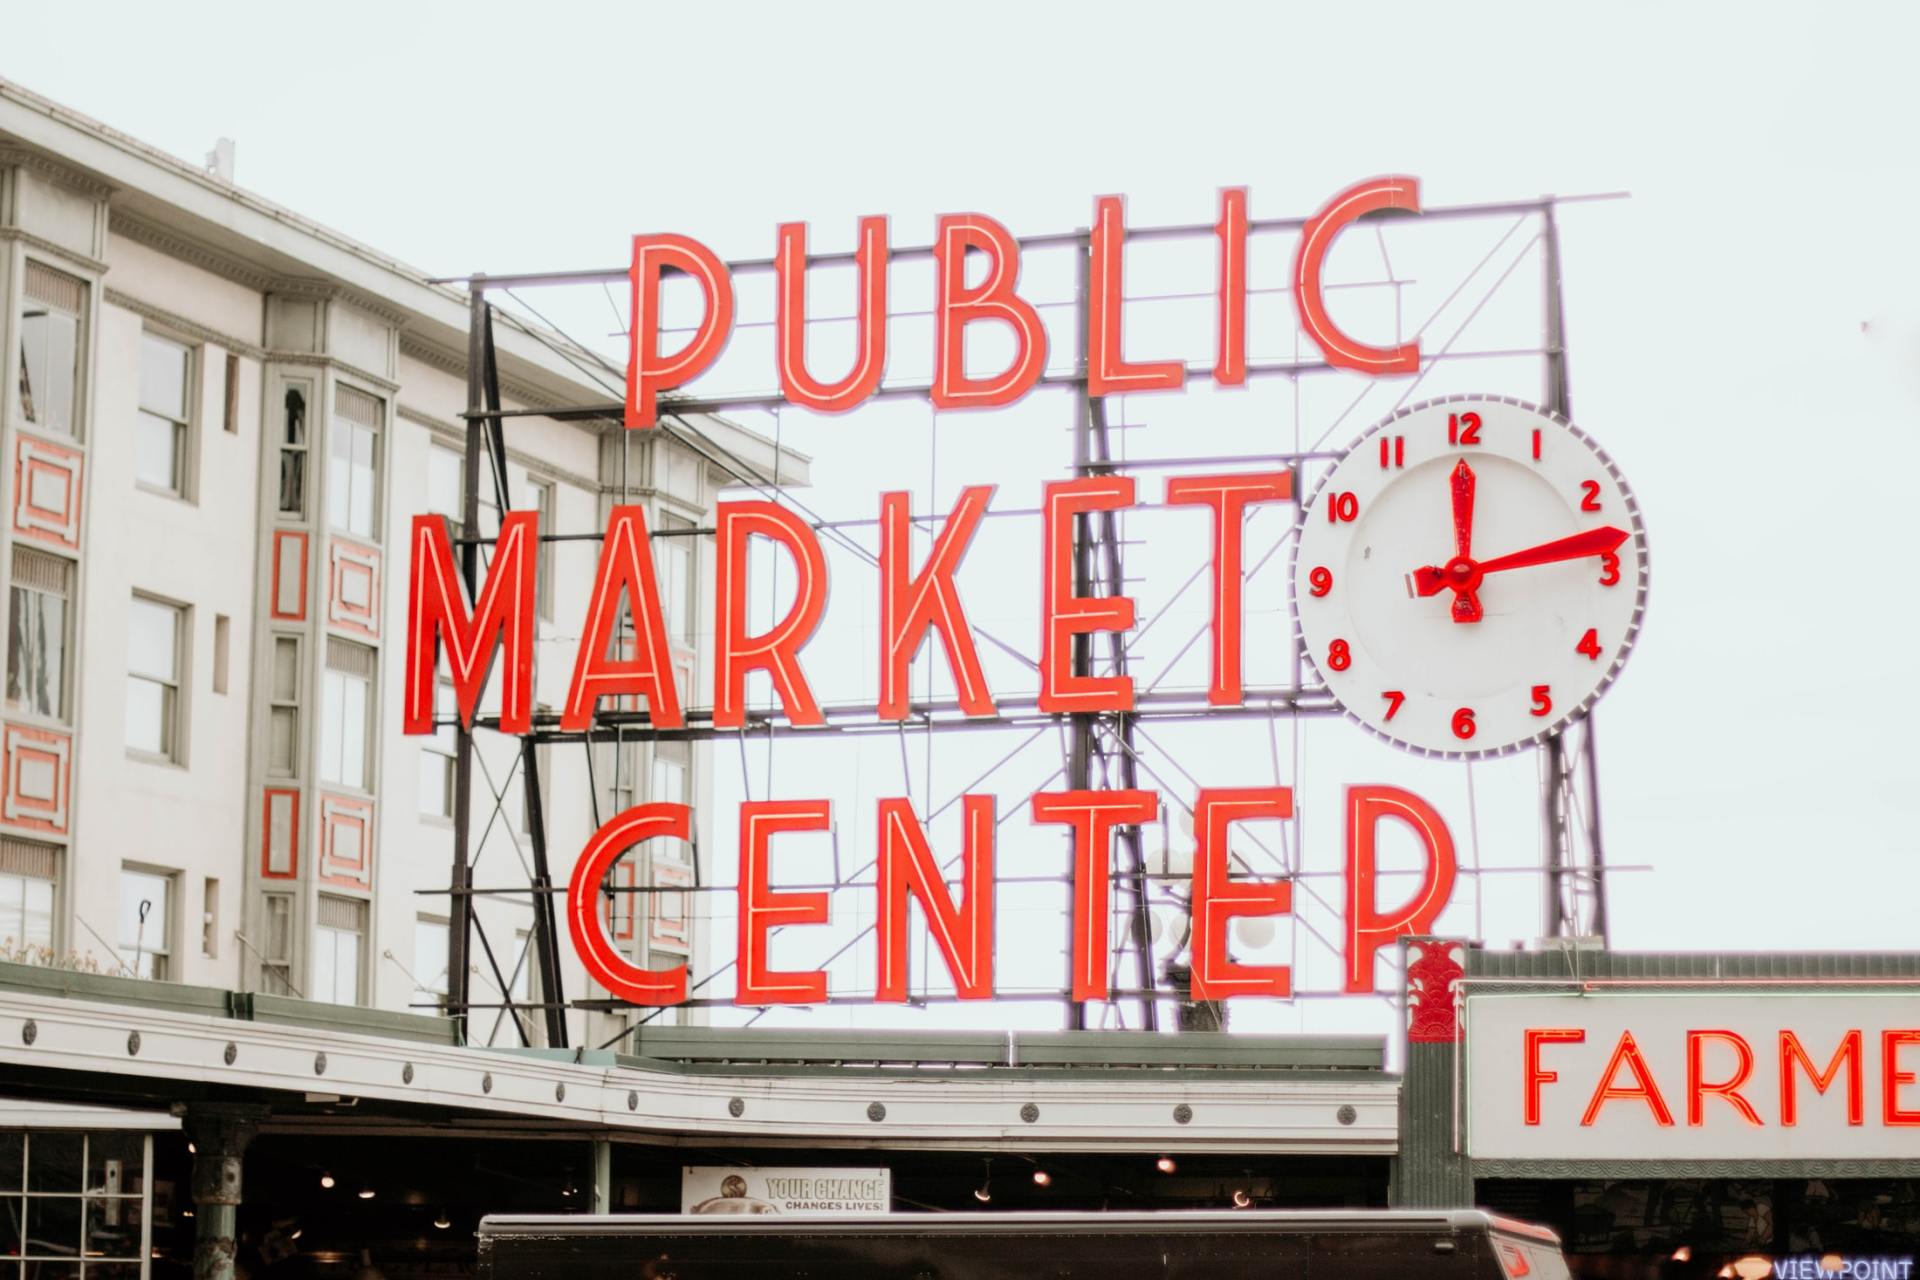 a sign for the public market center with a clock on it .